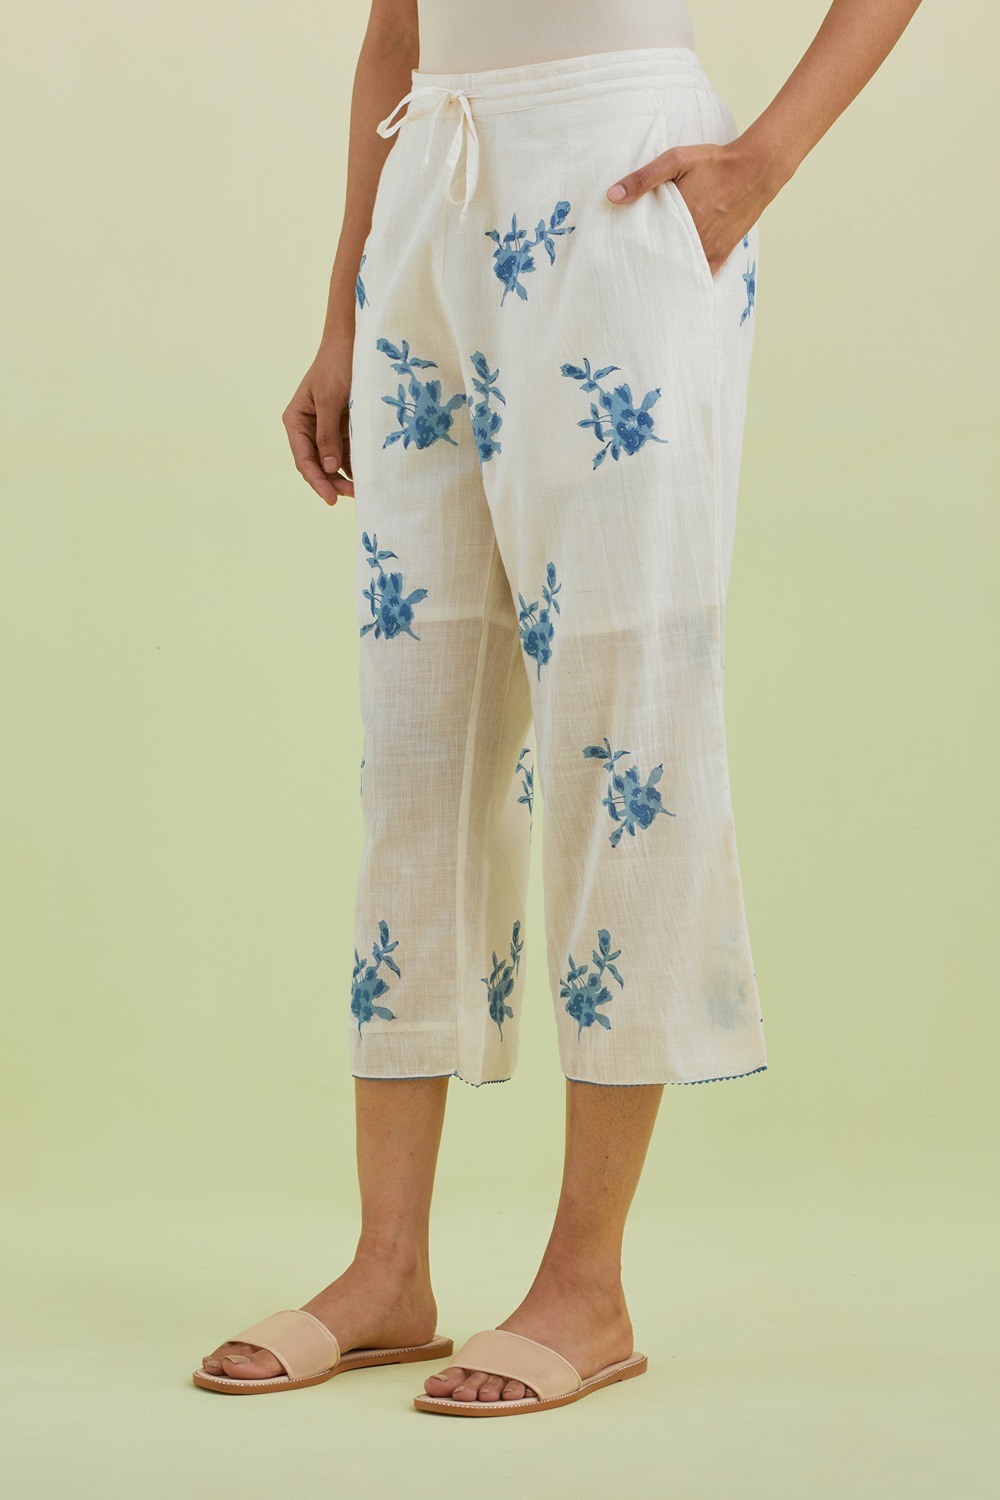 Off White Straight Ankle Length Pants With All-Over Blue Colored Floral Boota Hand-Block Print